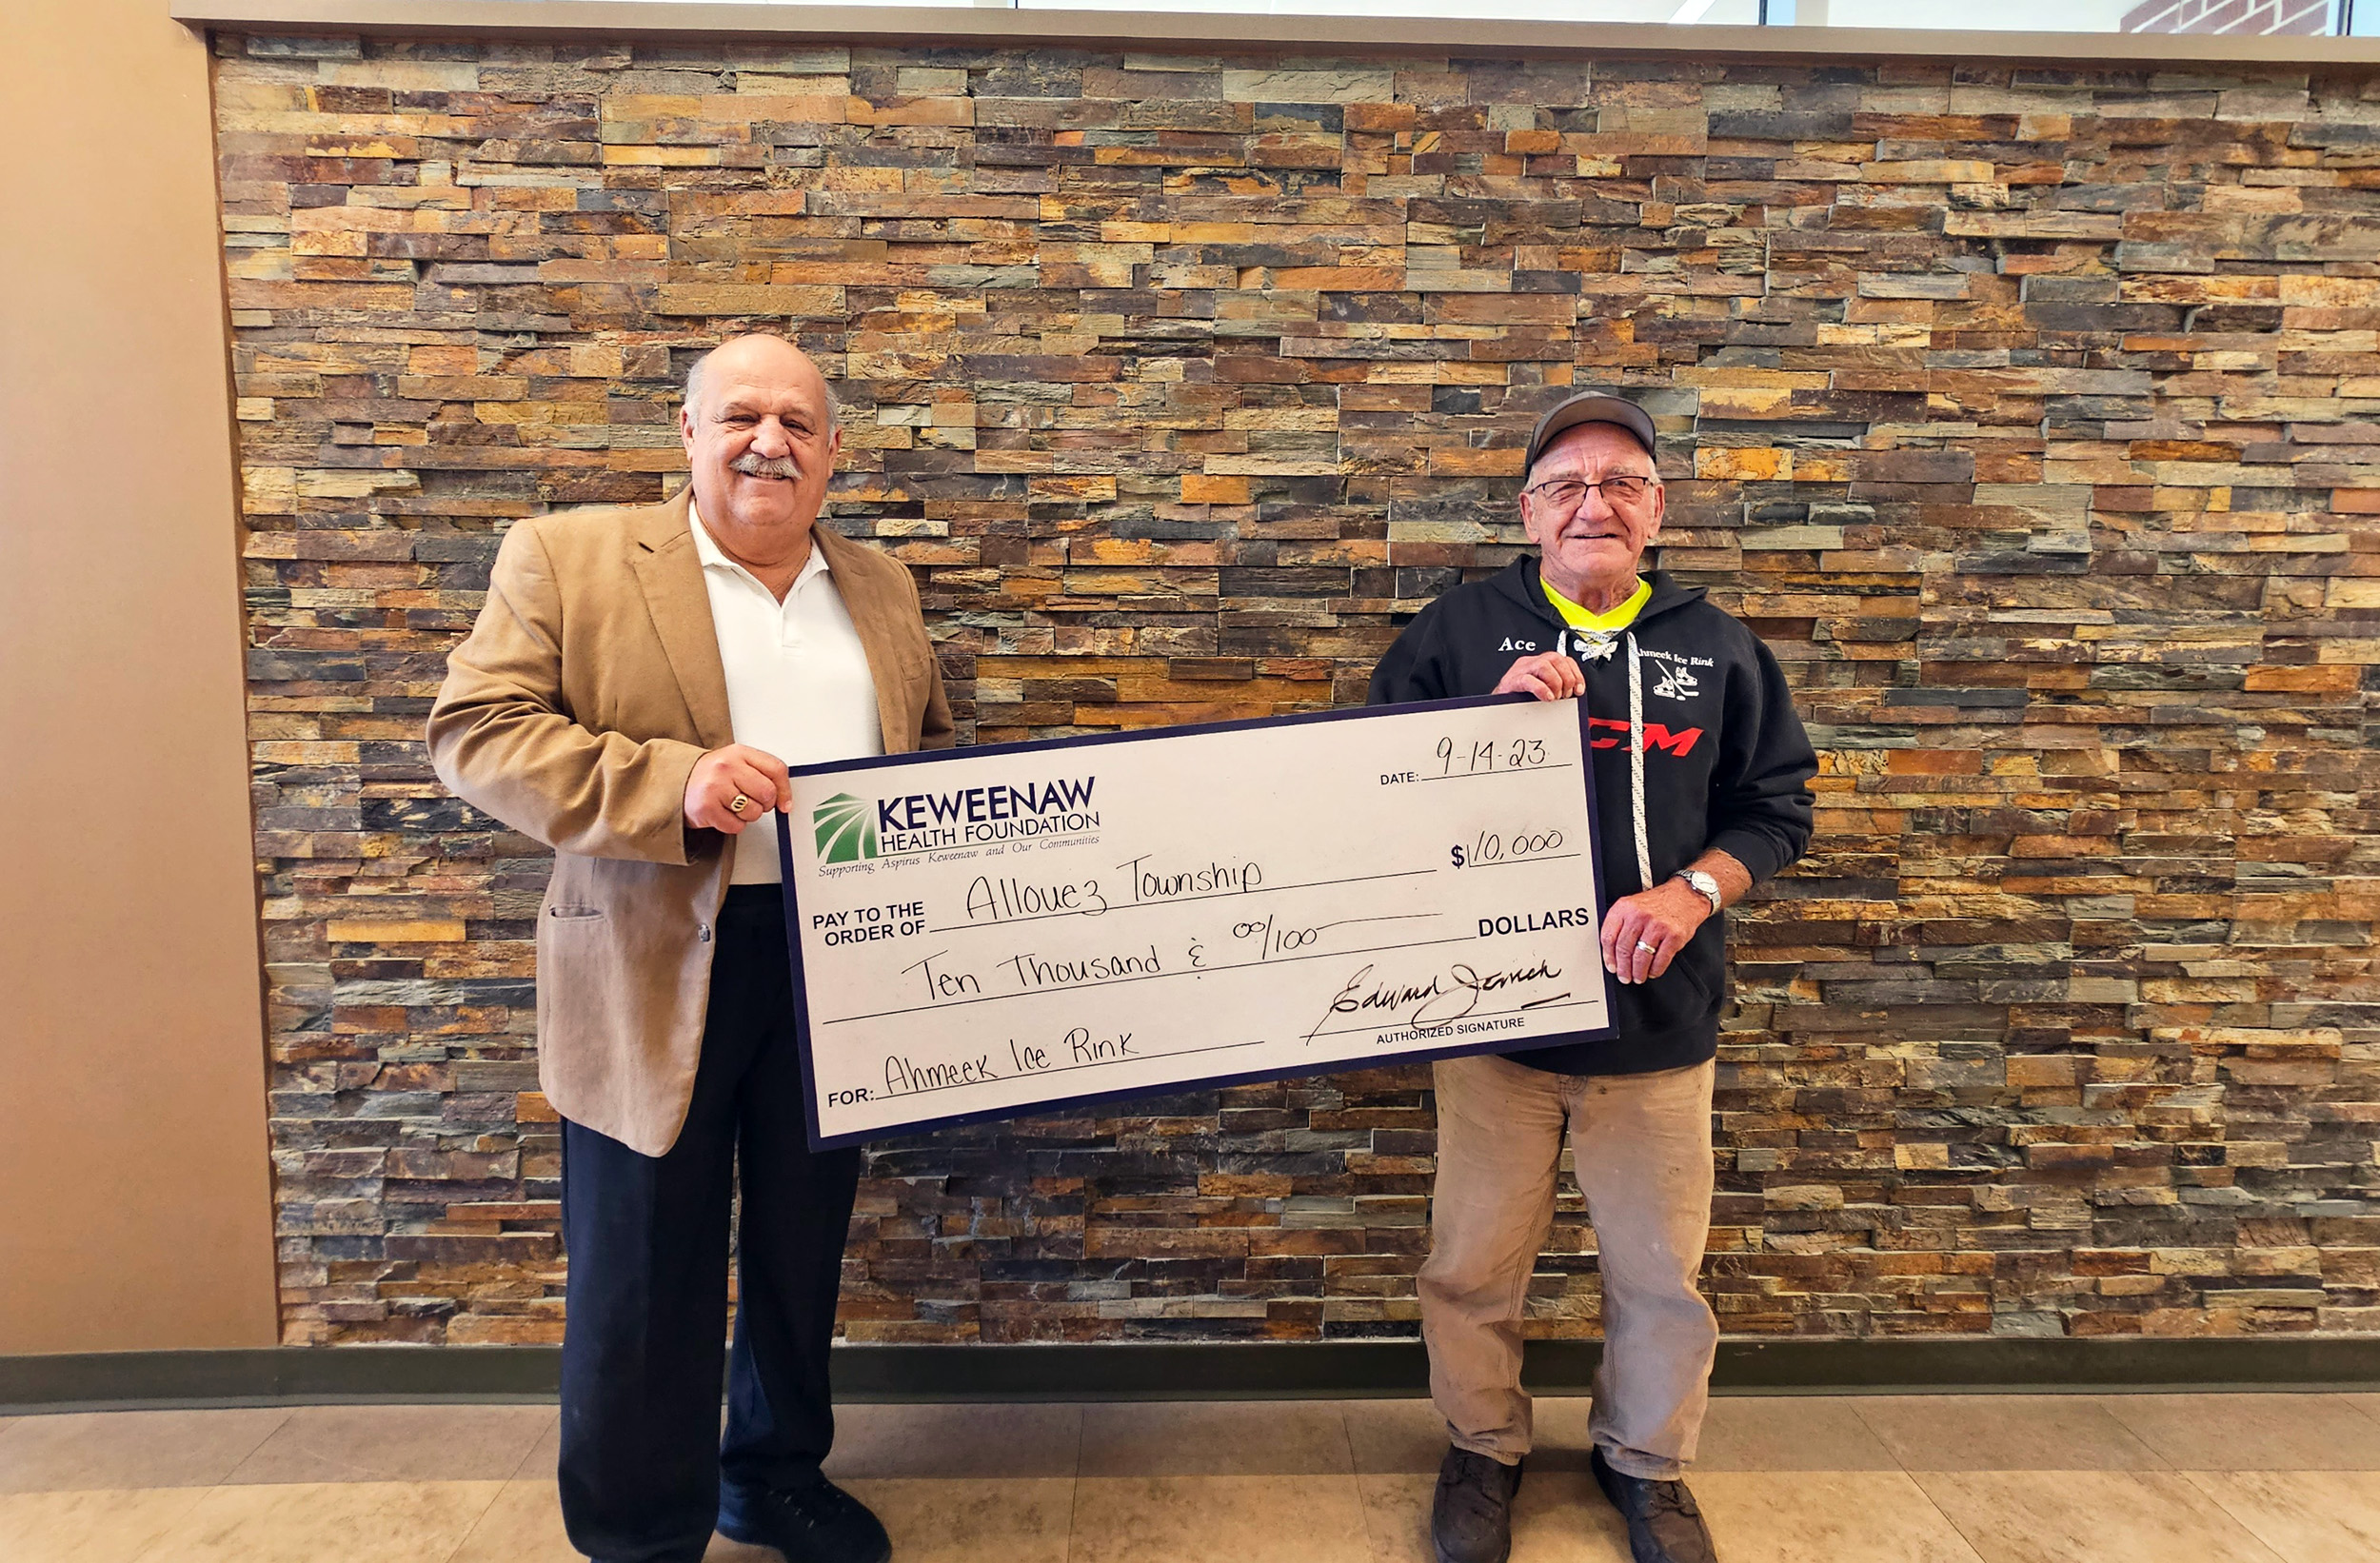 Press Release: Keweenaw Well being Foundation Generously Donates $ten,000 to Help Allouez Township/Ahmeek Ice Rink Upgrades